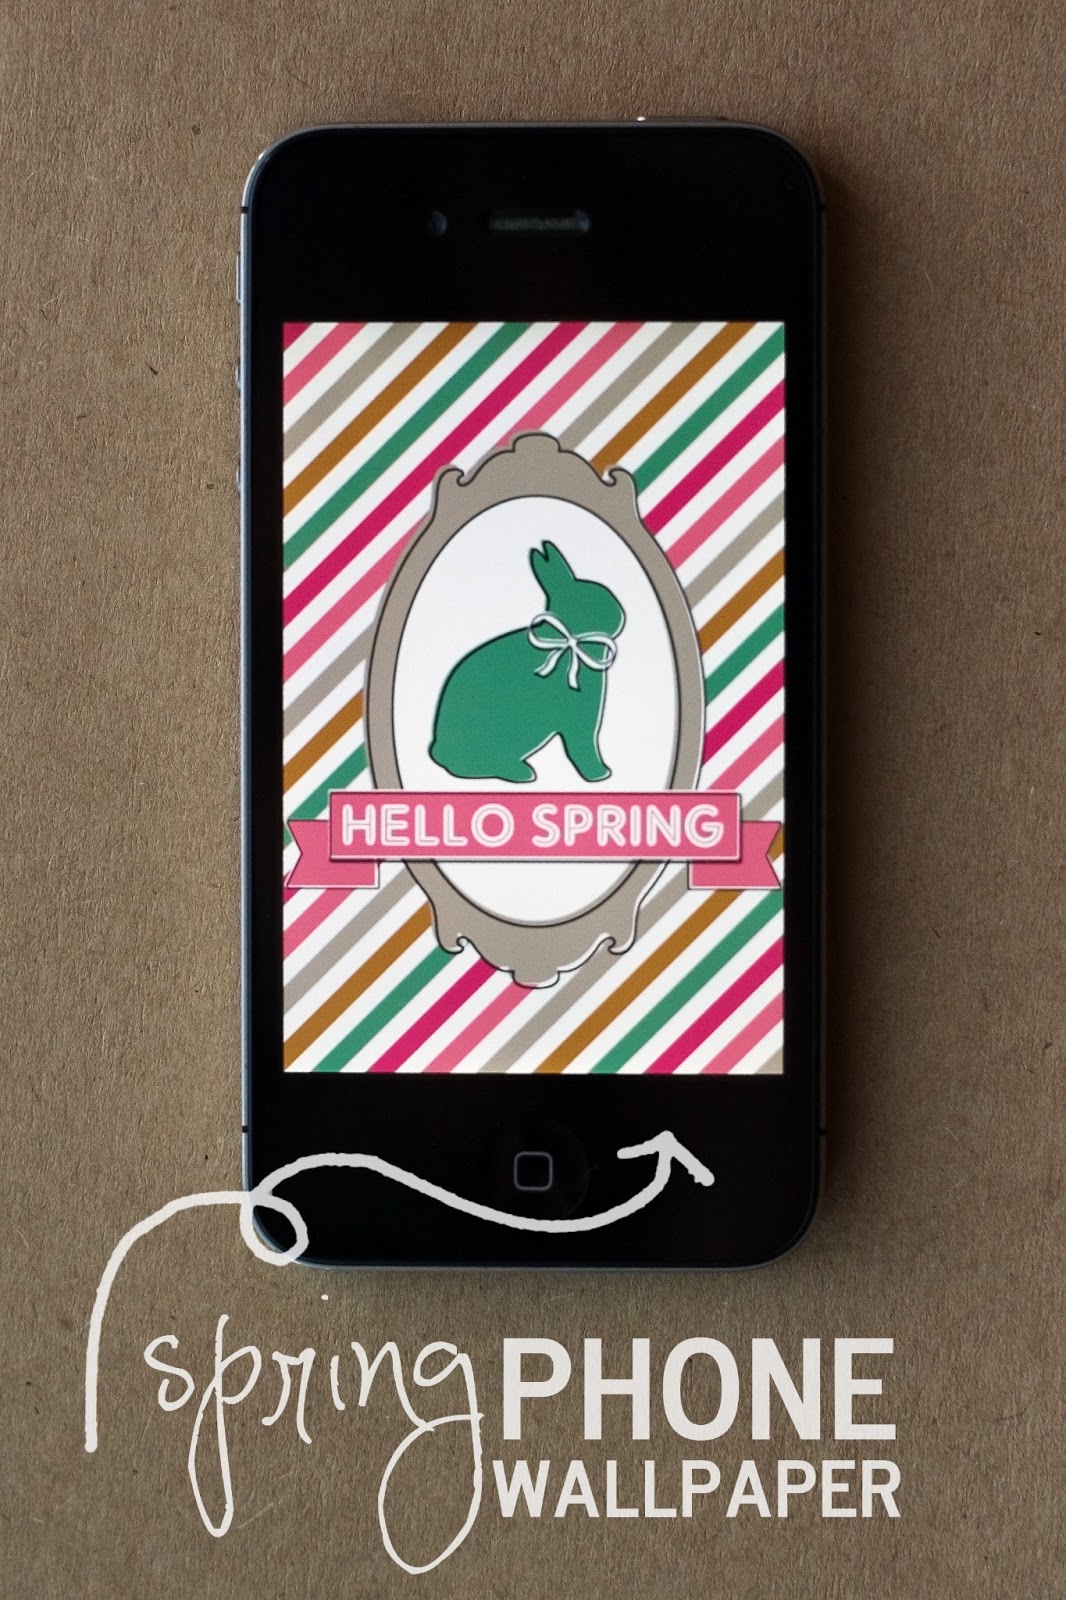 Download The Hello Spring Wallpaper Here - Wallpaper , HD Wallpaper & Backgrounds